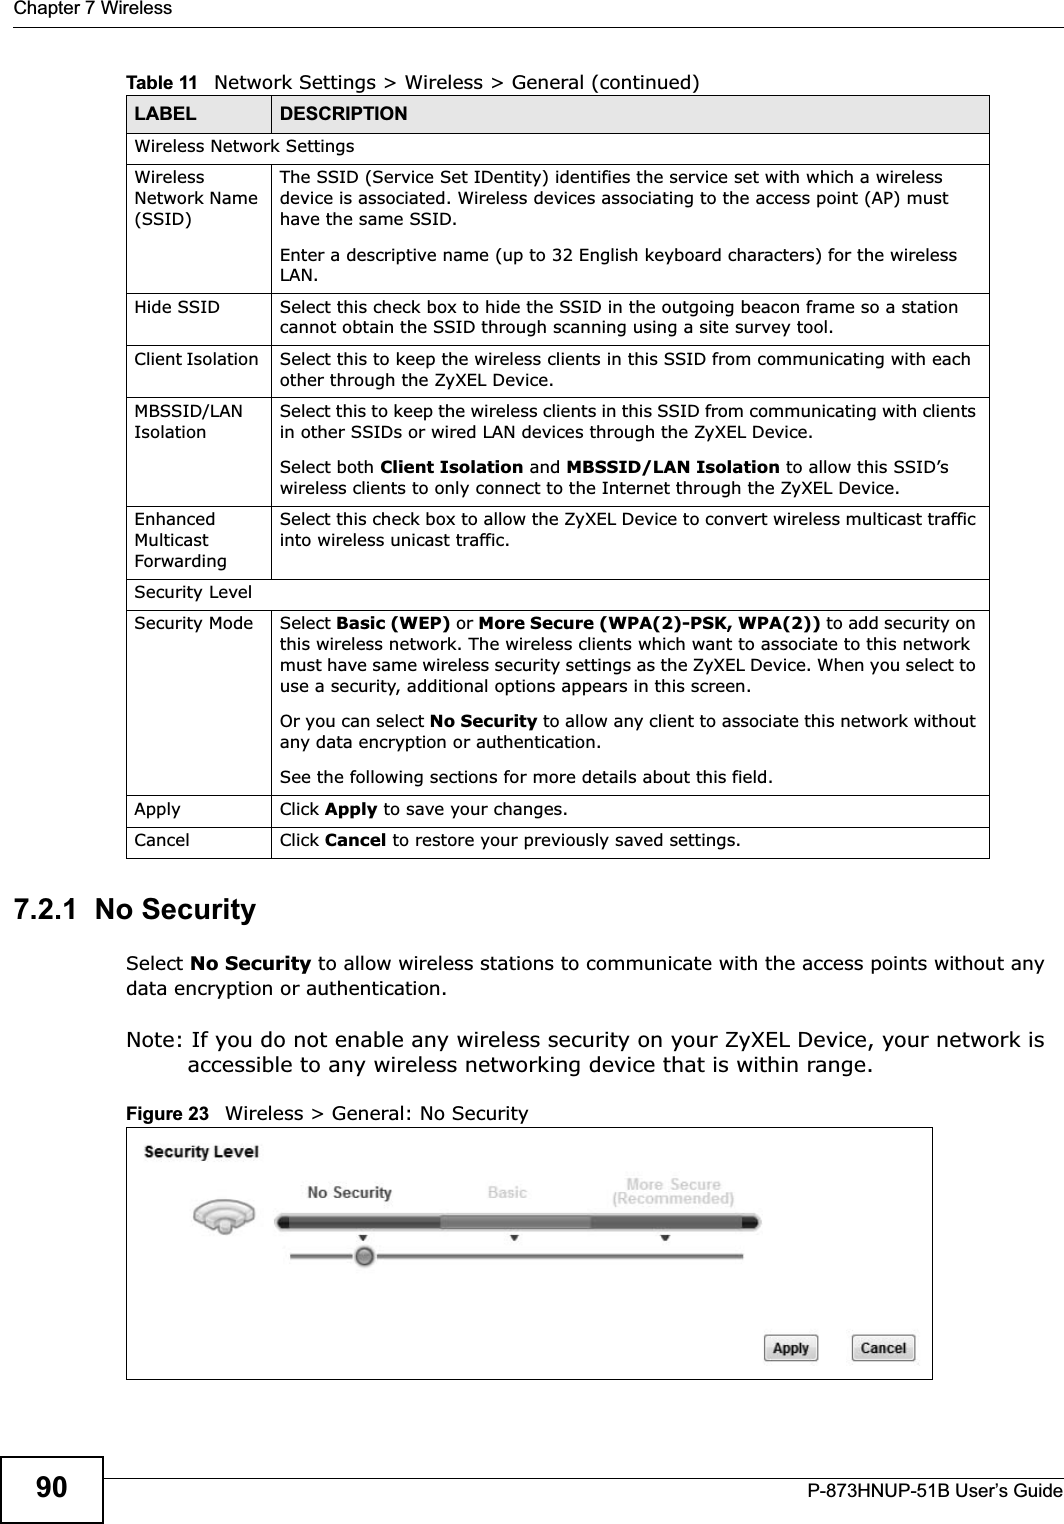 Chapter 7 WirelessP-873HNUP-51B User’s Guide907.2.1  No SecuritySelect No Security to allow wireless stations to communicate with the access points without any data encryption or authentication.Note: If you do not enable any wireless security on your ZyXEL Device, your network is accessible to any wireless networking device that is within range.Figure 23   Wireless &gt; General: No SecurityWireless Network SettingsWireless Network Name (SSID)The SSID (Service Set IDentity) identifies the service set with which a wireless device is associated. Wireless devices associating to the access point (AP) must have the same SSID. Enter a descriptive name (up to 32 English keyboard characters) for the wireless LAN.Hide SSID Select this check box to hide the SSID in the outgoing beacon frame so a station cannot obtain the SSID through scanning using a site survey tool.Client Isolation  Select this to keep the wireless clients in this SSID from communicating with each other through the ZyXEL Device. MBSSID/LAN Isolation Select this to keep the wireless clients in this SSID from communicating with clients in other SSIDs or wired LAN devices through the ZyXEL Device.Select both Client Isolation and MBSSID/LAN Isolation to allow this SSID’s wireless clients to only connect to the Internet through the ZyXEL Device.Enhanced Multicast Forwarding Select this check box to allow the ZyXEL Device to convert wireless multicast traffic into wireless unicast traffic.Security LevelSecurity Mode Select Basic (WEP) or More Secure (WPA(2)-PSK, WPA(2)) to add security on this wireless network. The wireless clients which want to associate to this network must have same wireless security settings as the ZyXEL Device. When you select to use a security, additional options appears in this screen.  Or you can select No Security to allow any client to associate this network without any data encryption or authentication.See the following sections for more details about this field.Apply Click Apply to save your changes.Cancel Click Cancel to restore your previously saved settings.Table 11   Network Settings &gt; Wireless &gt; General (continued)LABEL DESCRIPTION